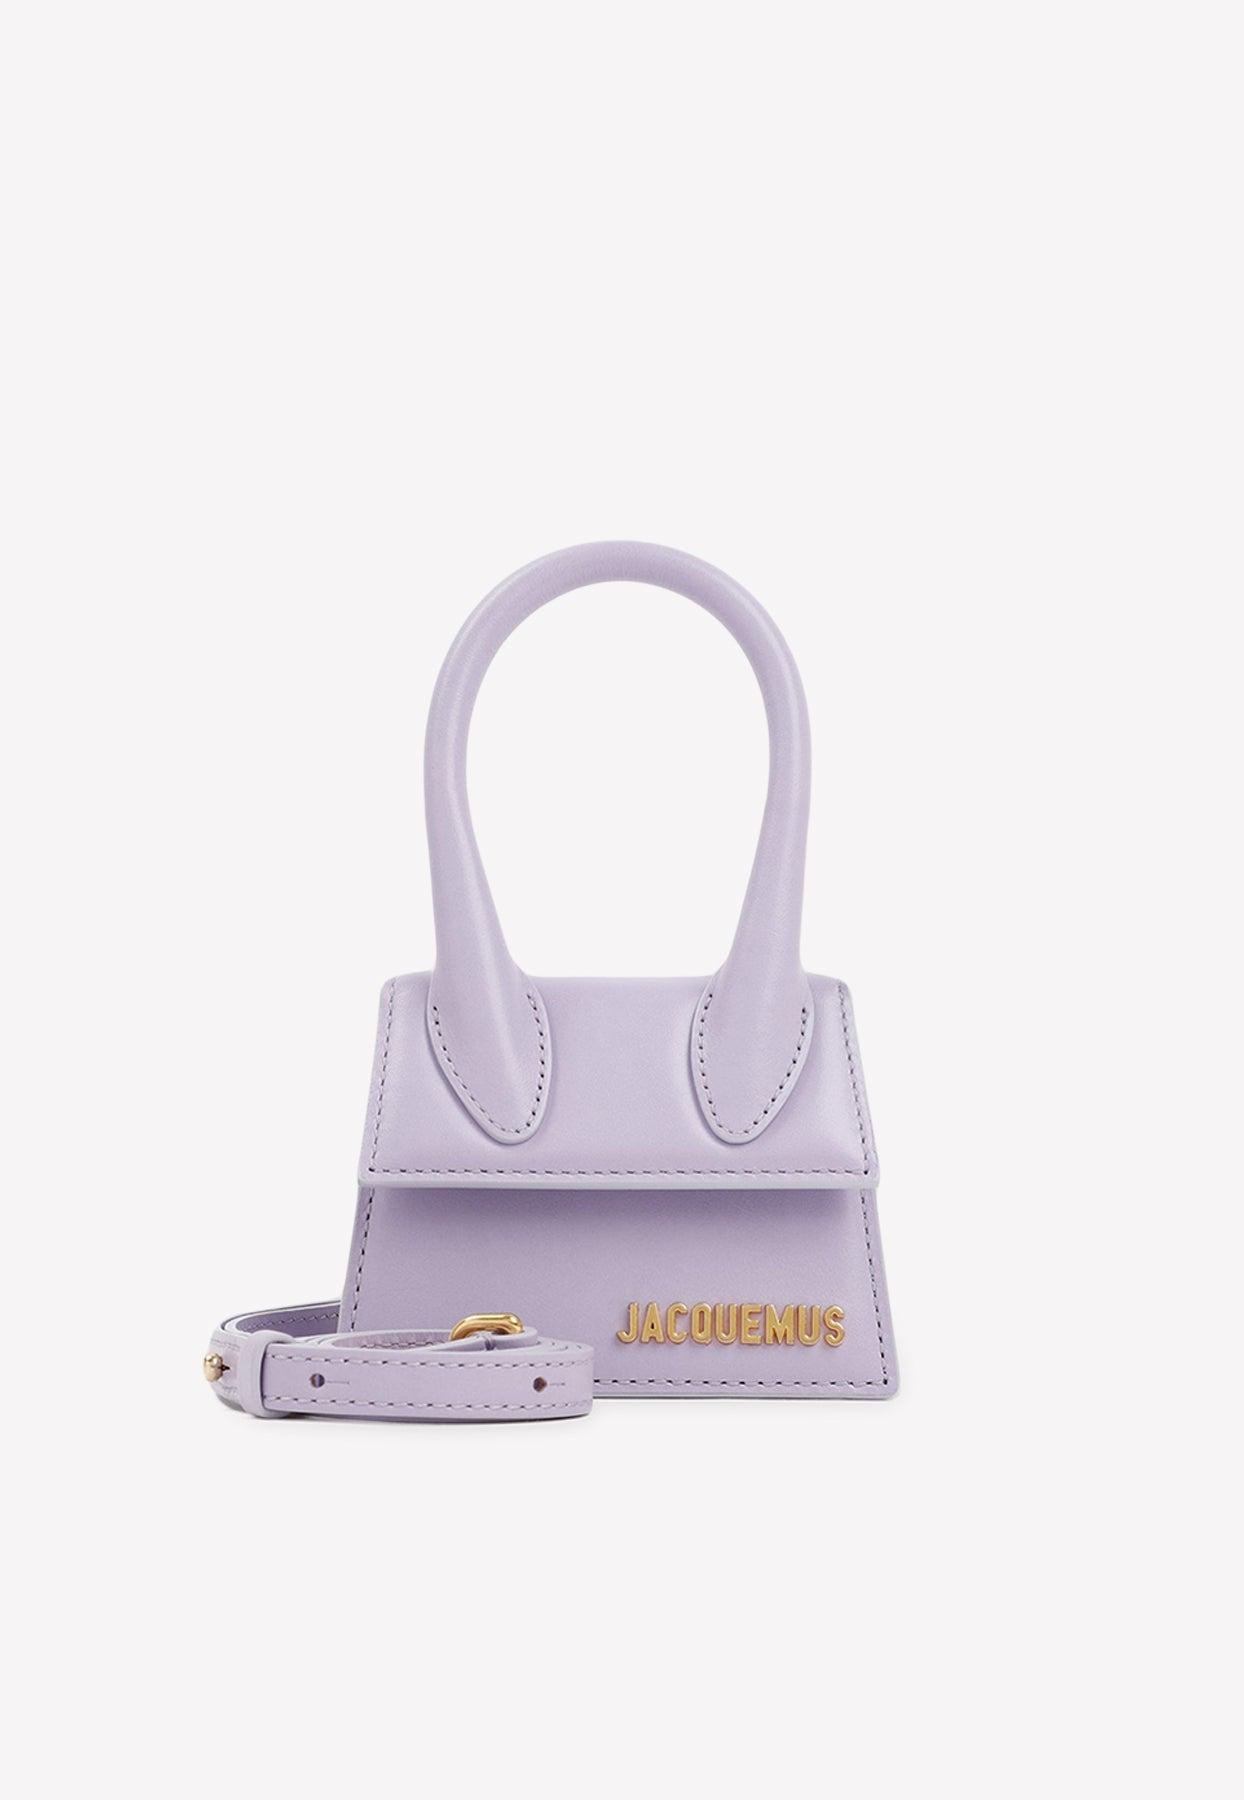 Jacquemus Le Chiquito Top Handle Bag In Leather in Purple | Lyst